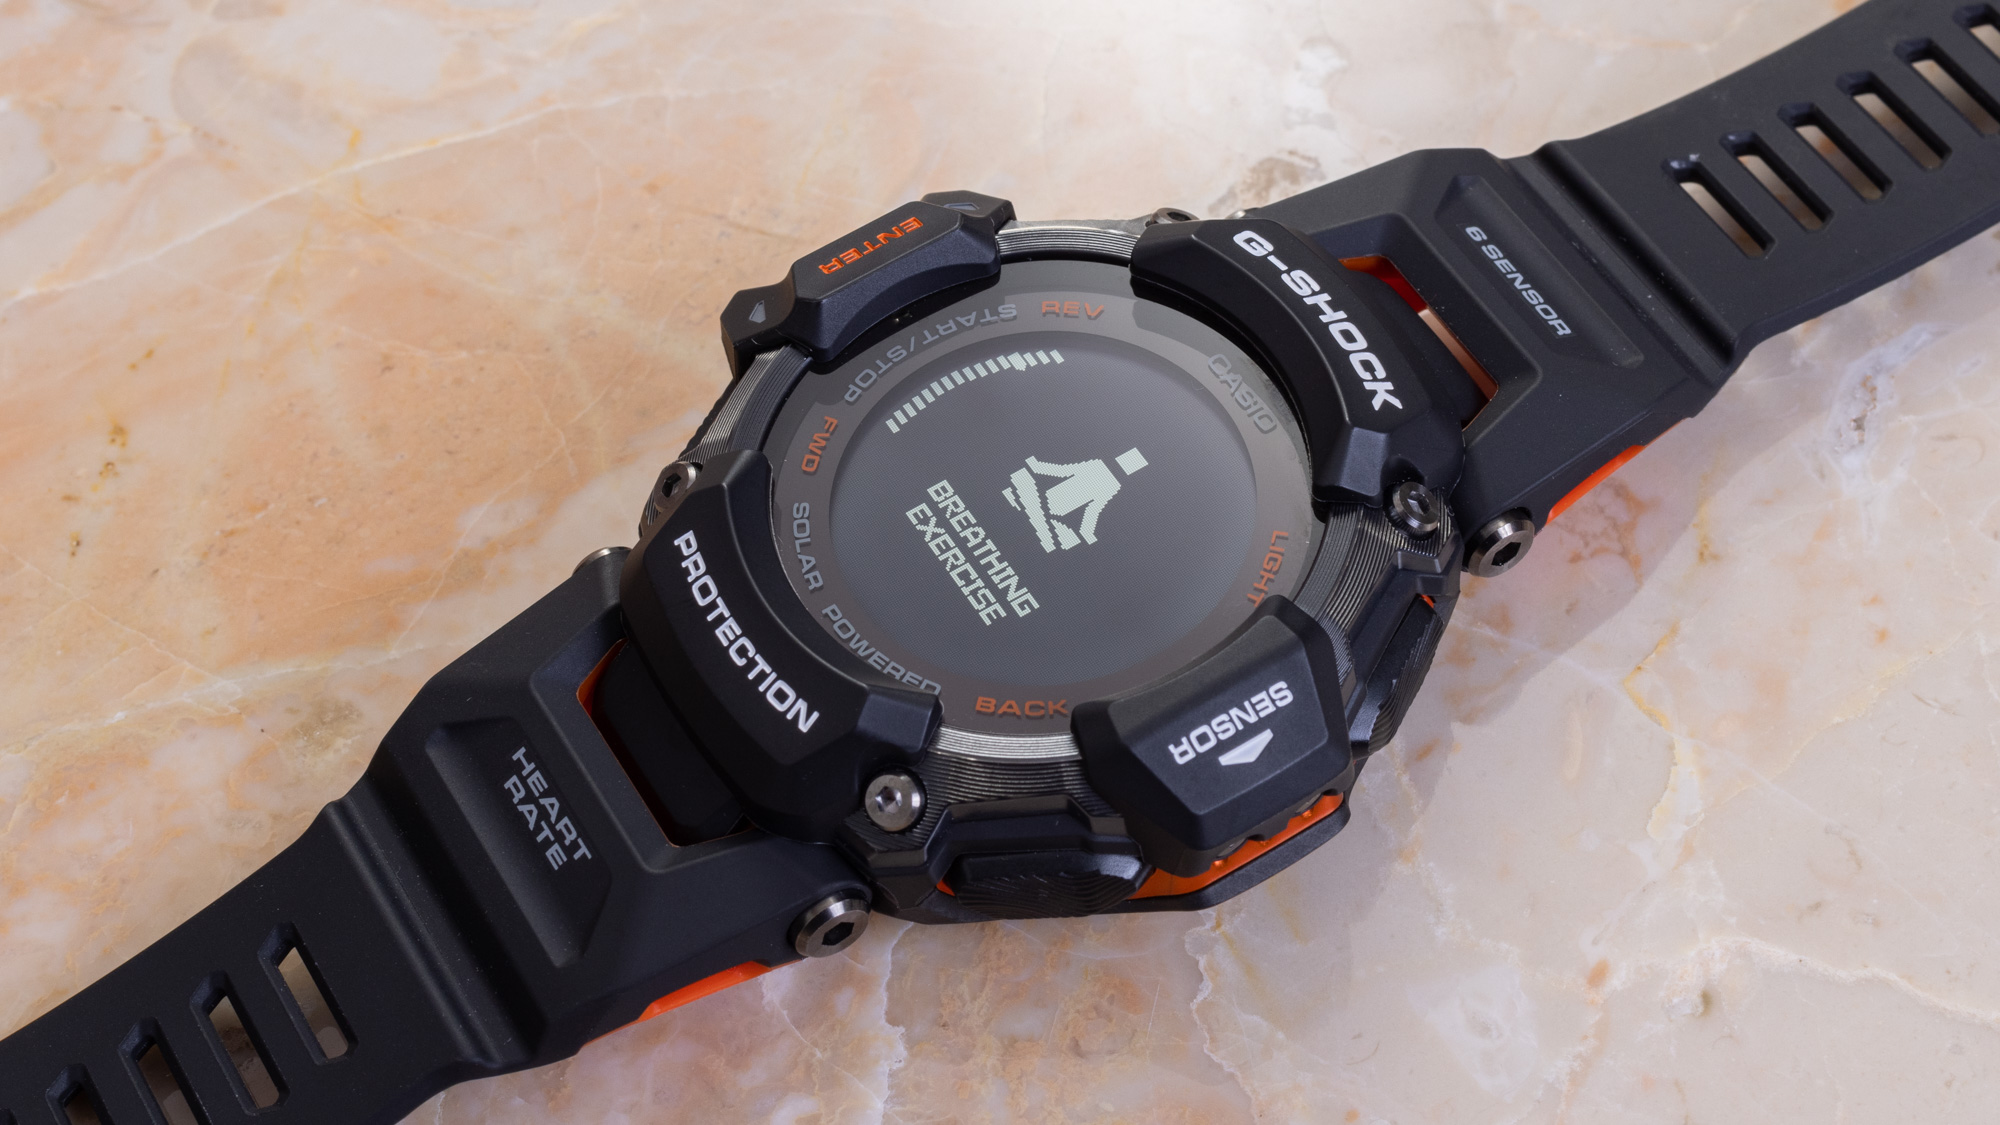 Watch Review: aBlogtoWatch Tracker Move GBD-H2000 Activity G-Shock | Casio Smart